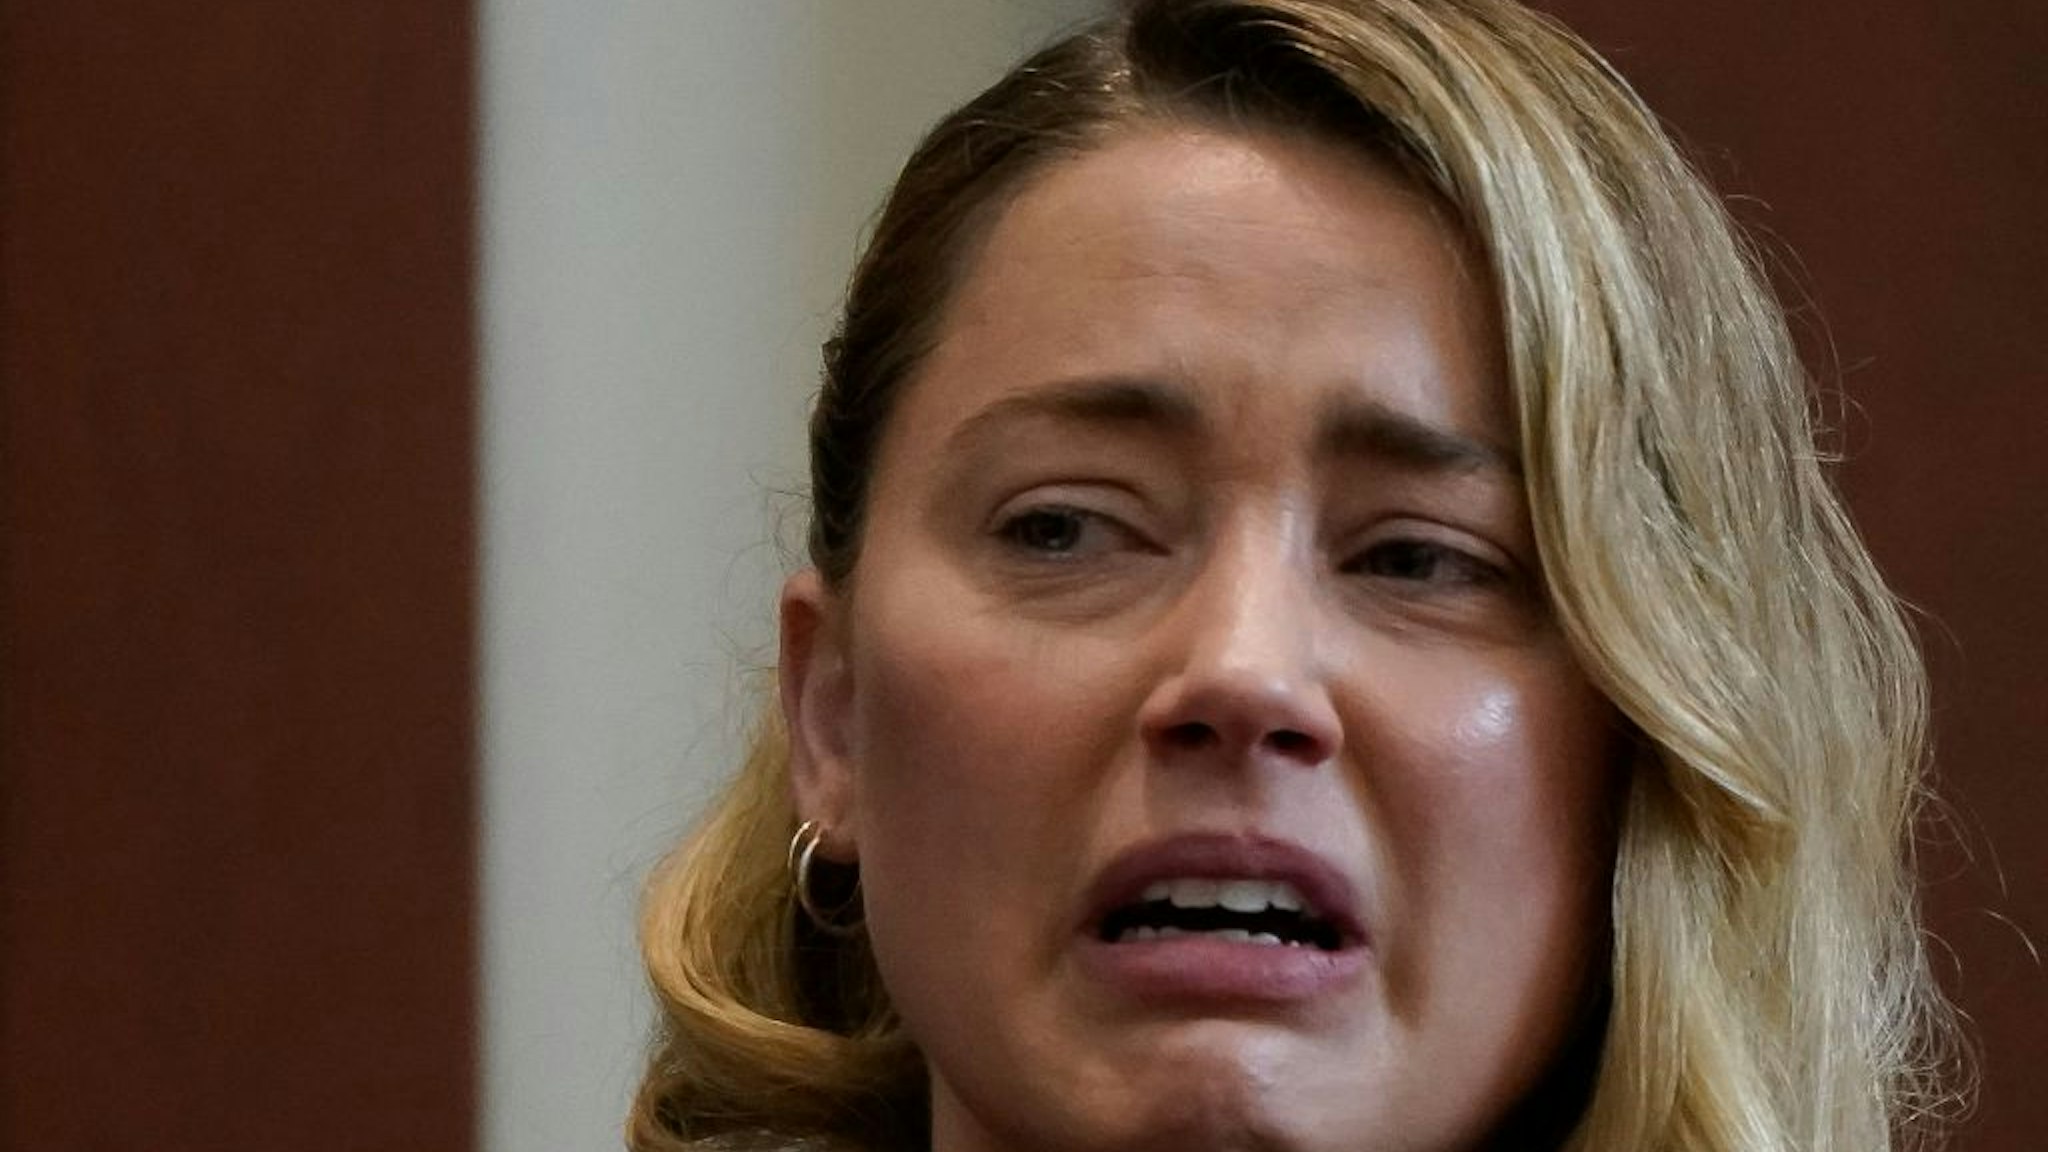 Actor Amber Heard testifies about the first time her ex-husband, actor Johnny Depp hit her, at Fairfax County Circuit Court during a defamation case against her by Depp in Fairfax, Virginia, on May 4, 2022.